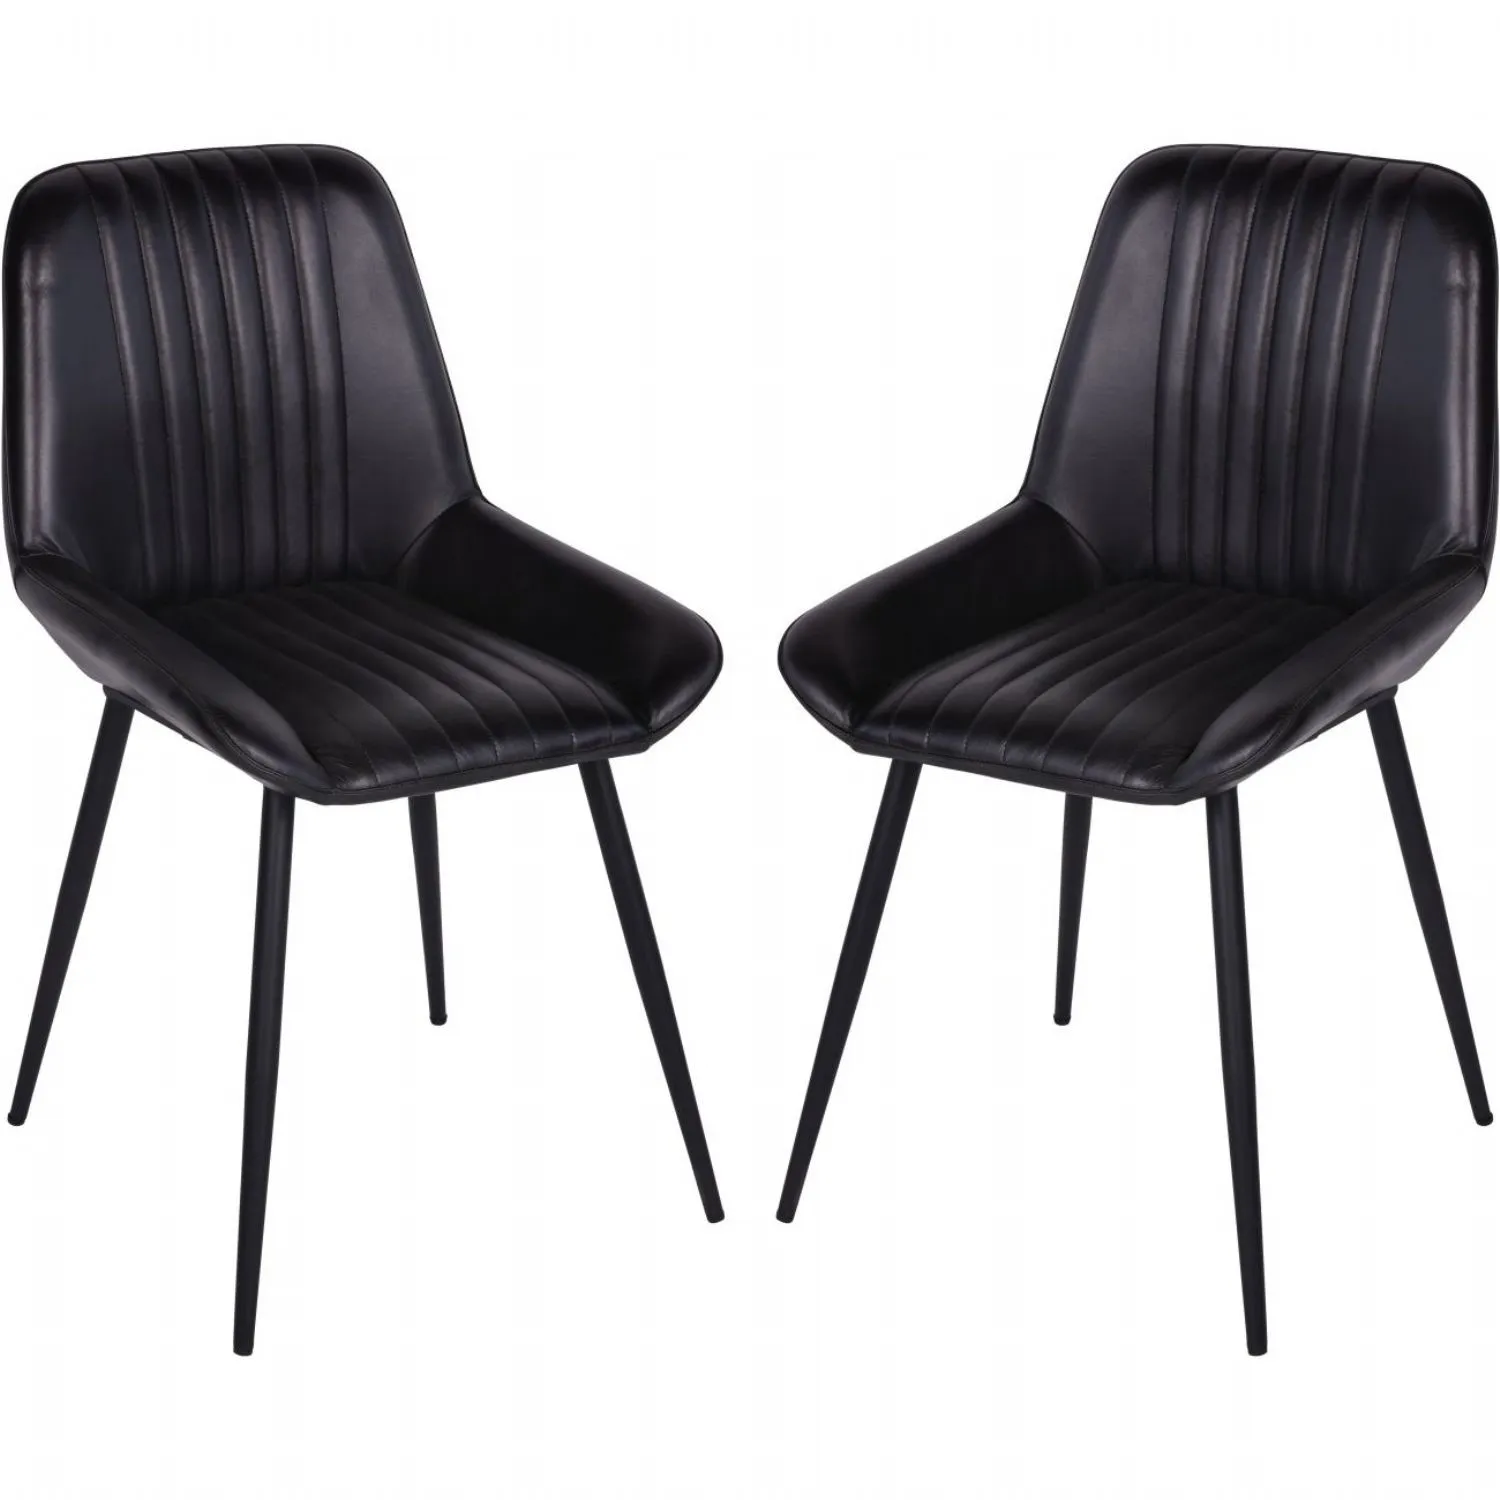 Pair of Pembroke Leather Dining Chairs in Charcoal